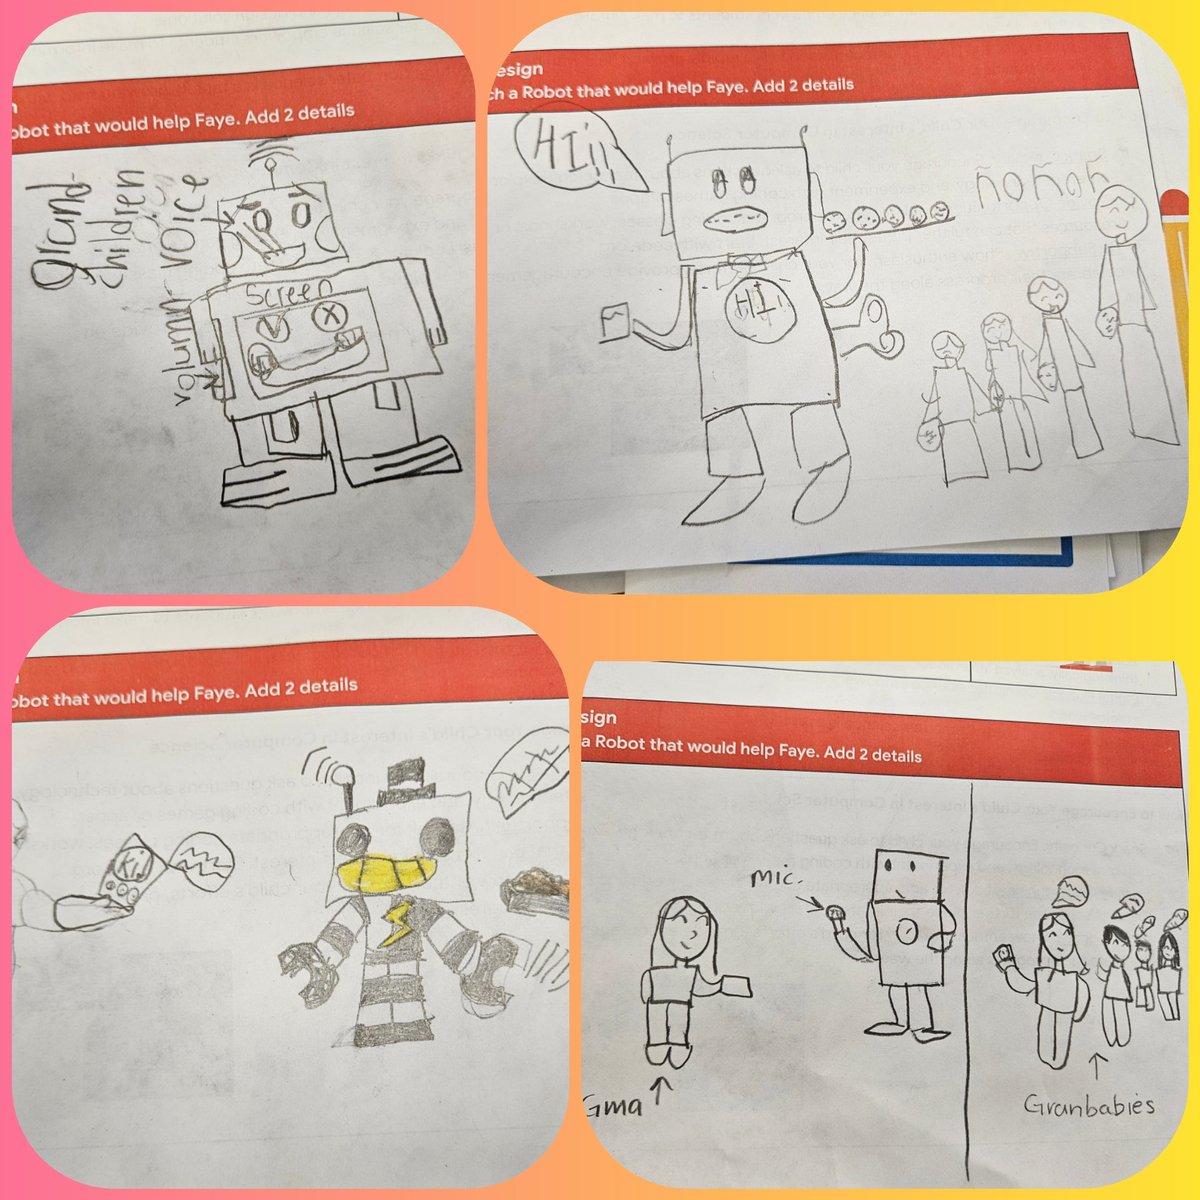 The 3rd-grade classes at @MLKJrLAUSD had #Googlers speak about creating robots to help others. Loved the creativity & compassion shown by students. #CSEDWEEK #CS4LAUSD #designthinking #CS4All @rafaellbaldera1 @ISTEofficial @hourofcode @LAUSDArts @LASchools